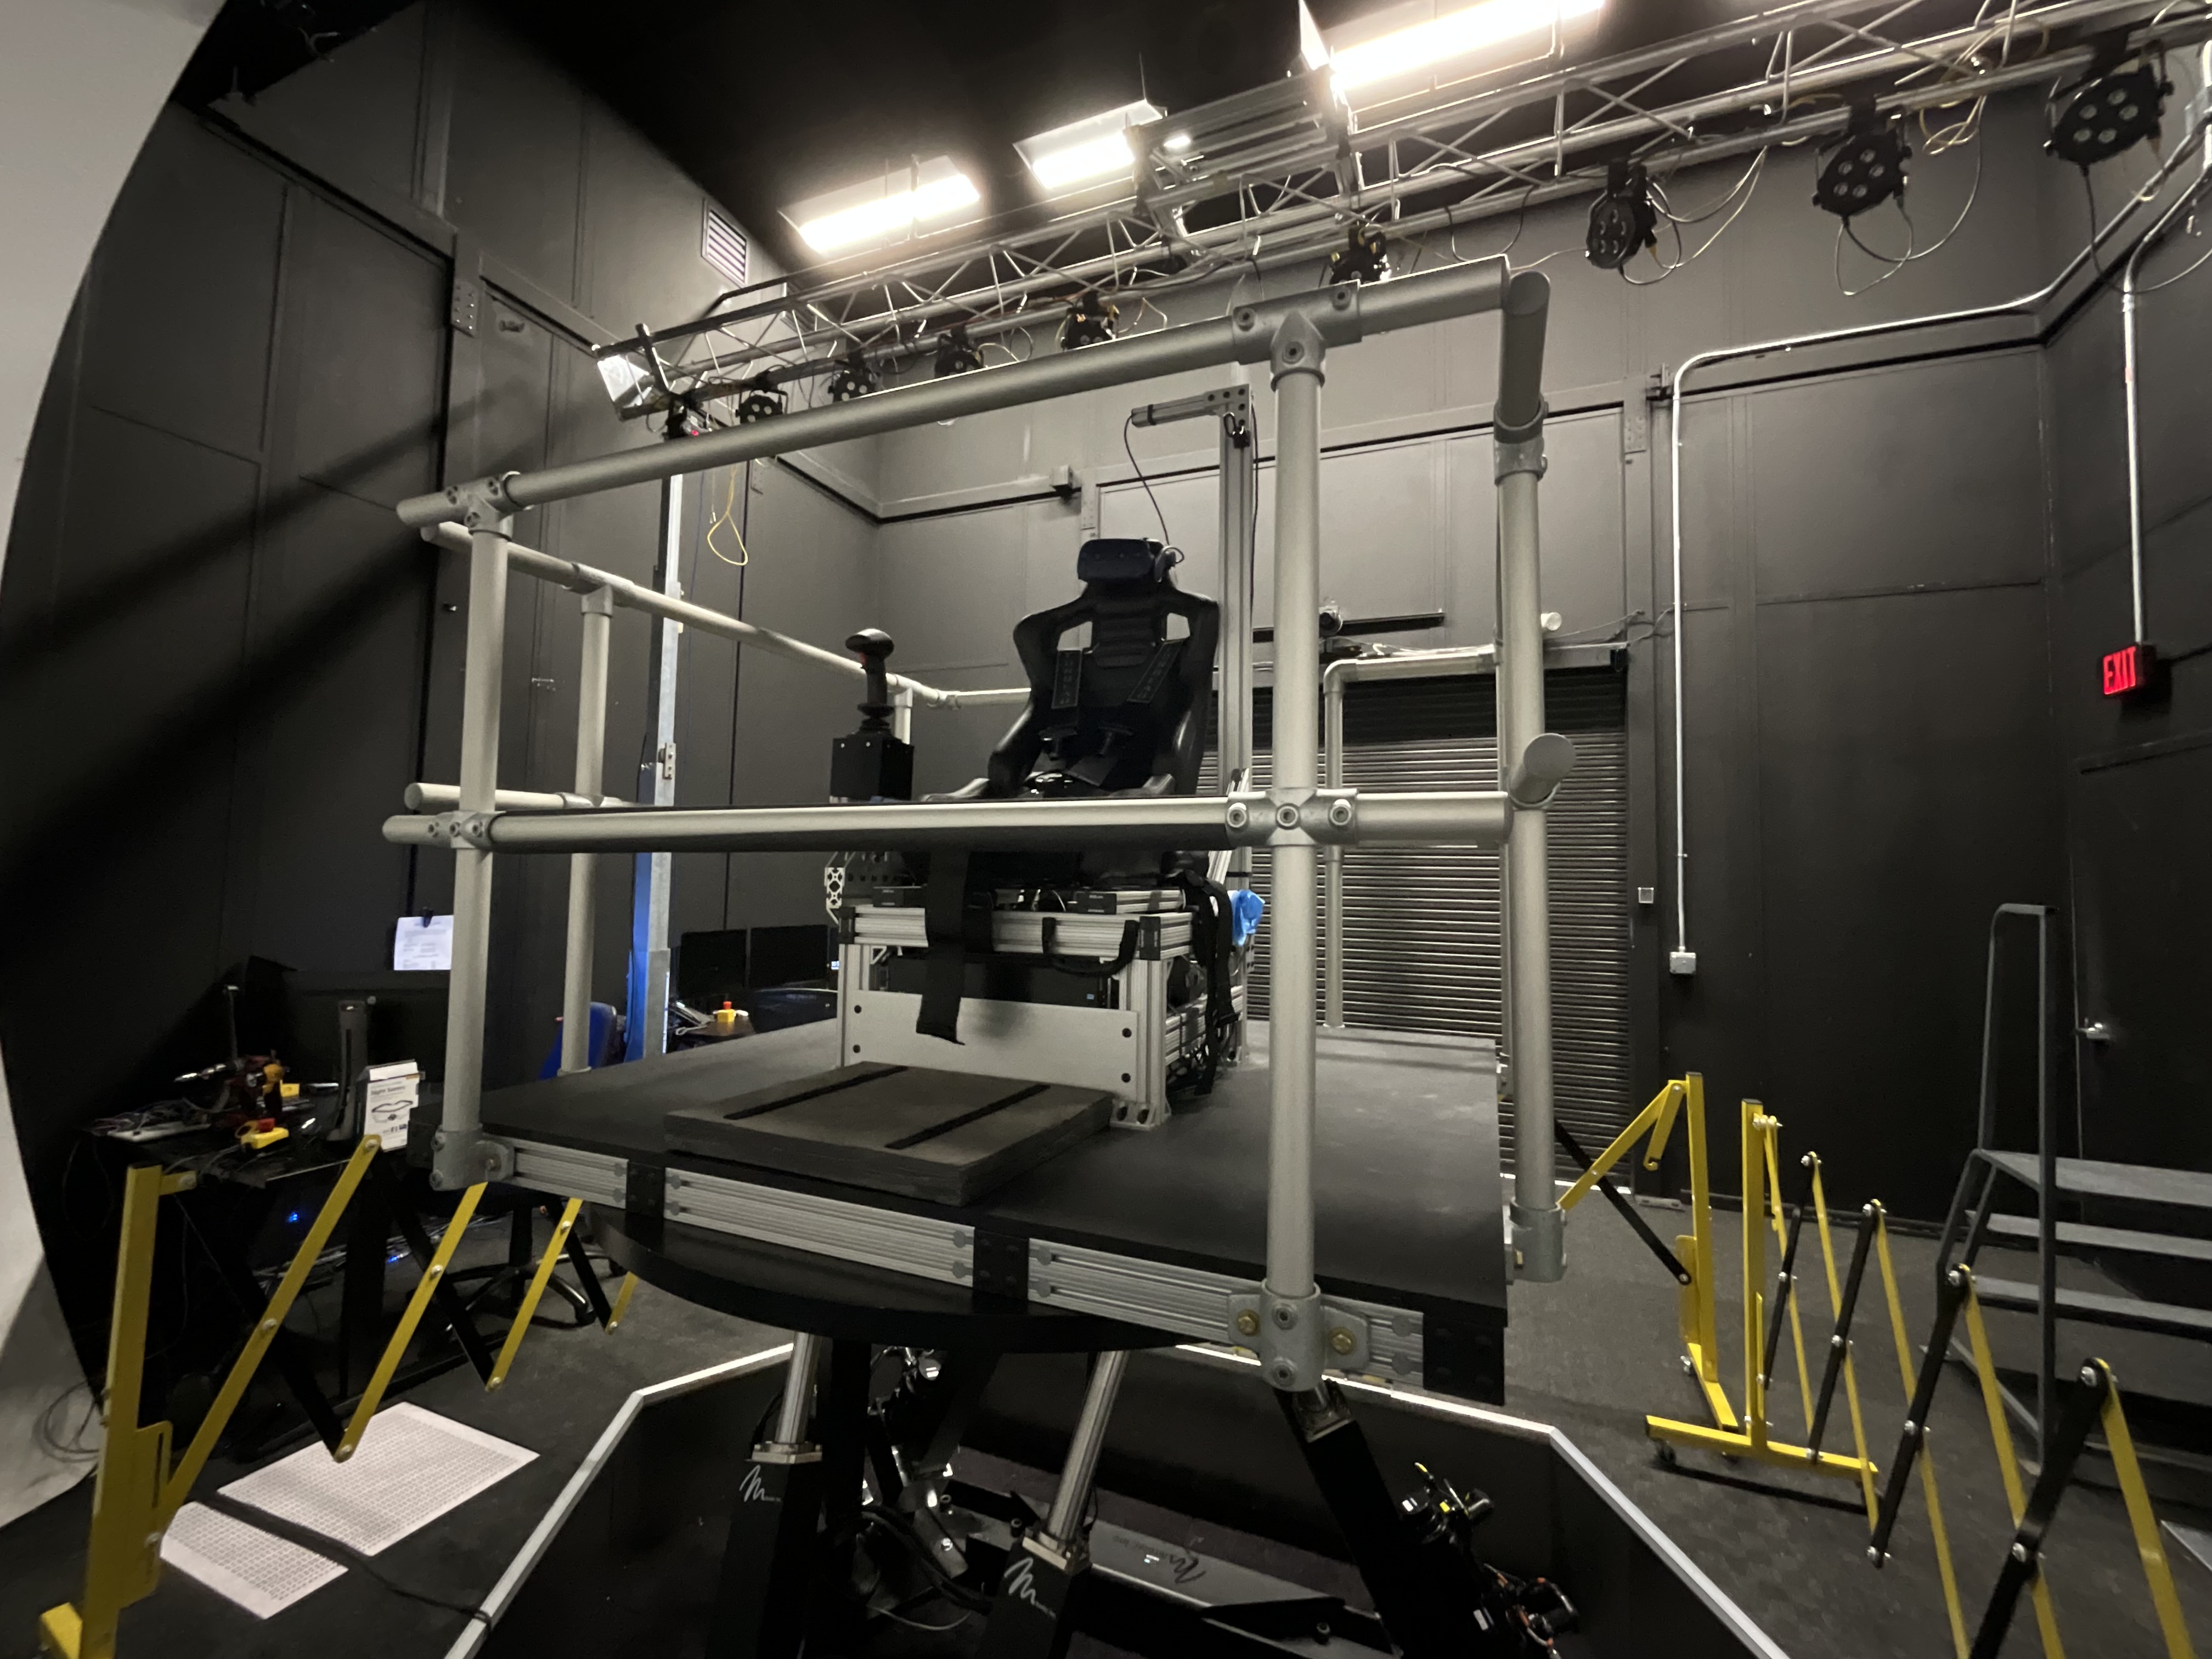 An image of the SES Mini Dome Motion Table Simulator